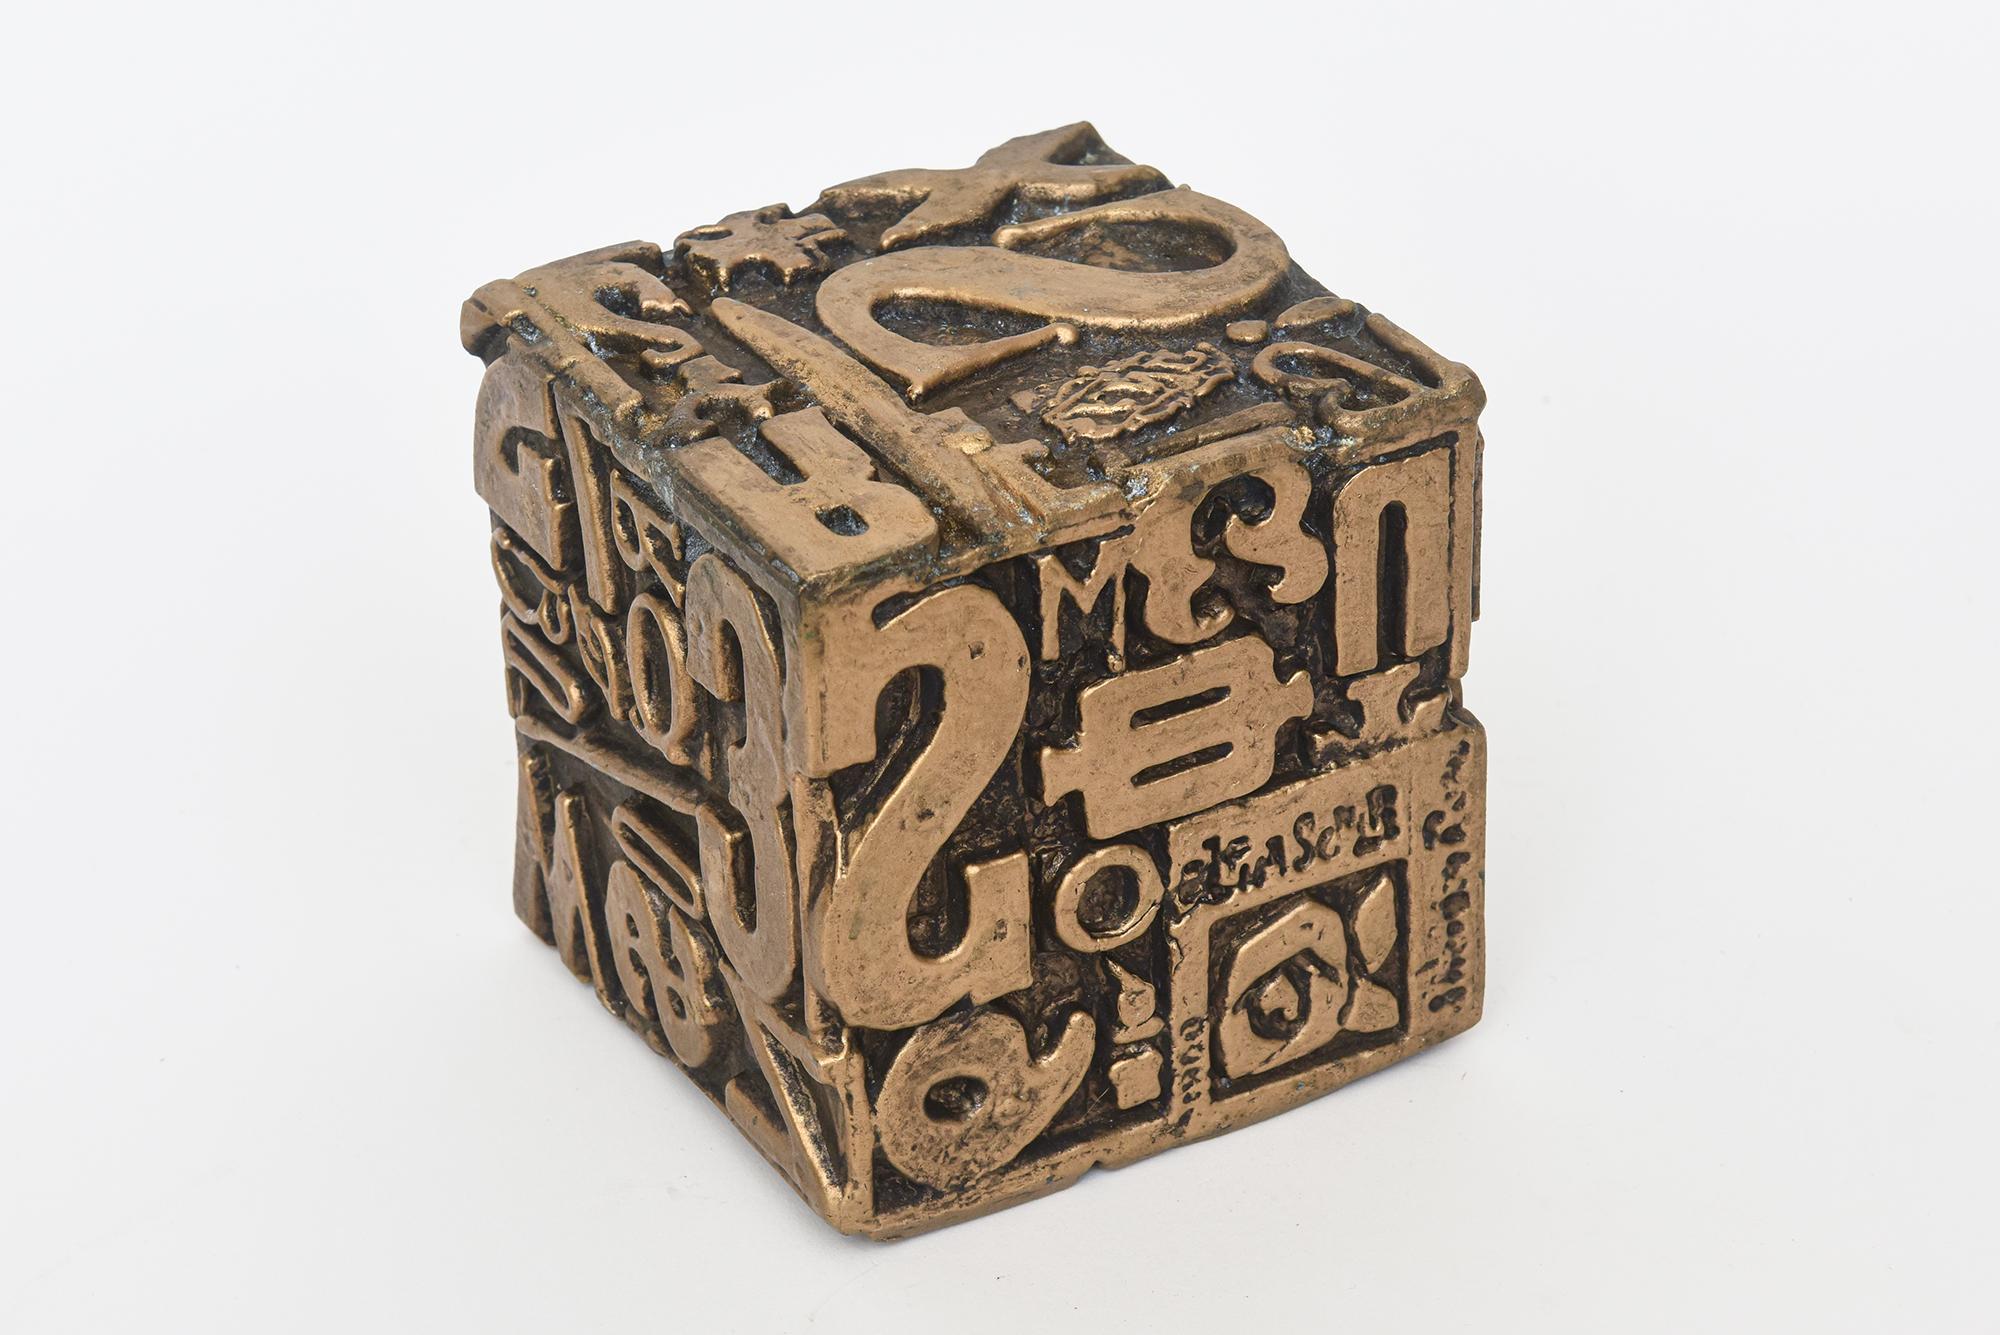 This interesting alpha cube abstract sculpture by Sheldon Rose is a mixed media comprised of polychrome metal and paint. It features a medley of faux letterpress symbols, numbers and letters. Each side is different and feasts the eyes. It is a cast